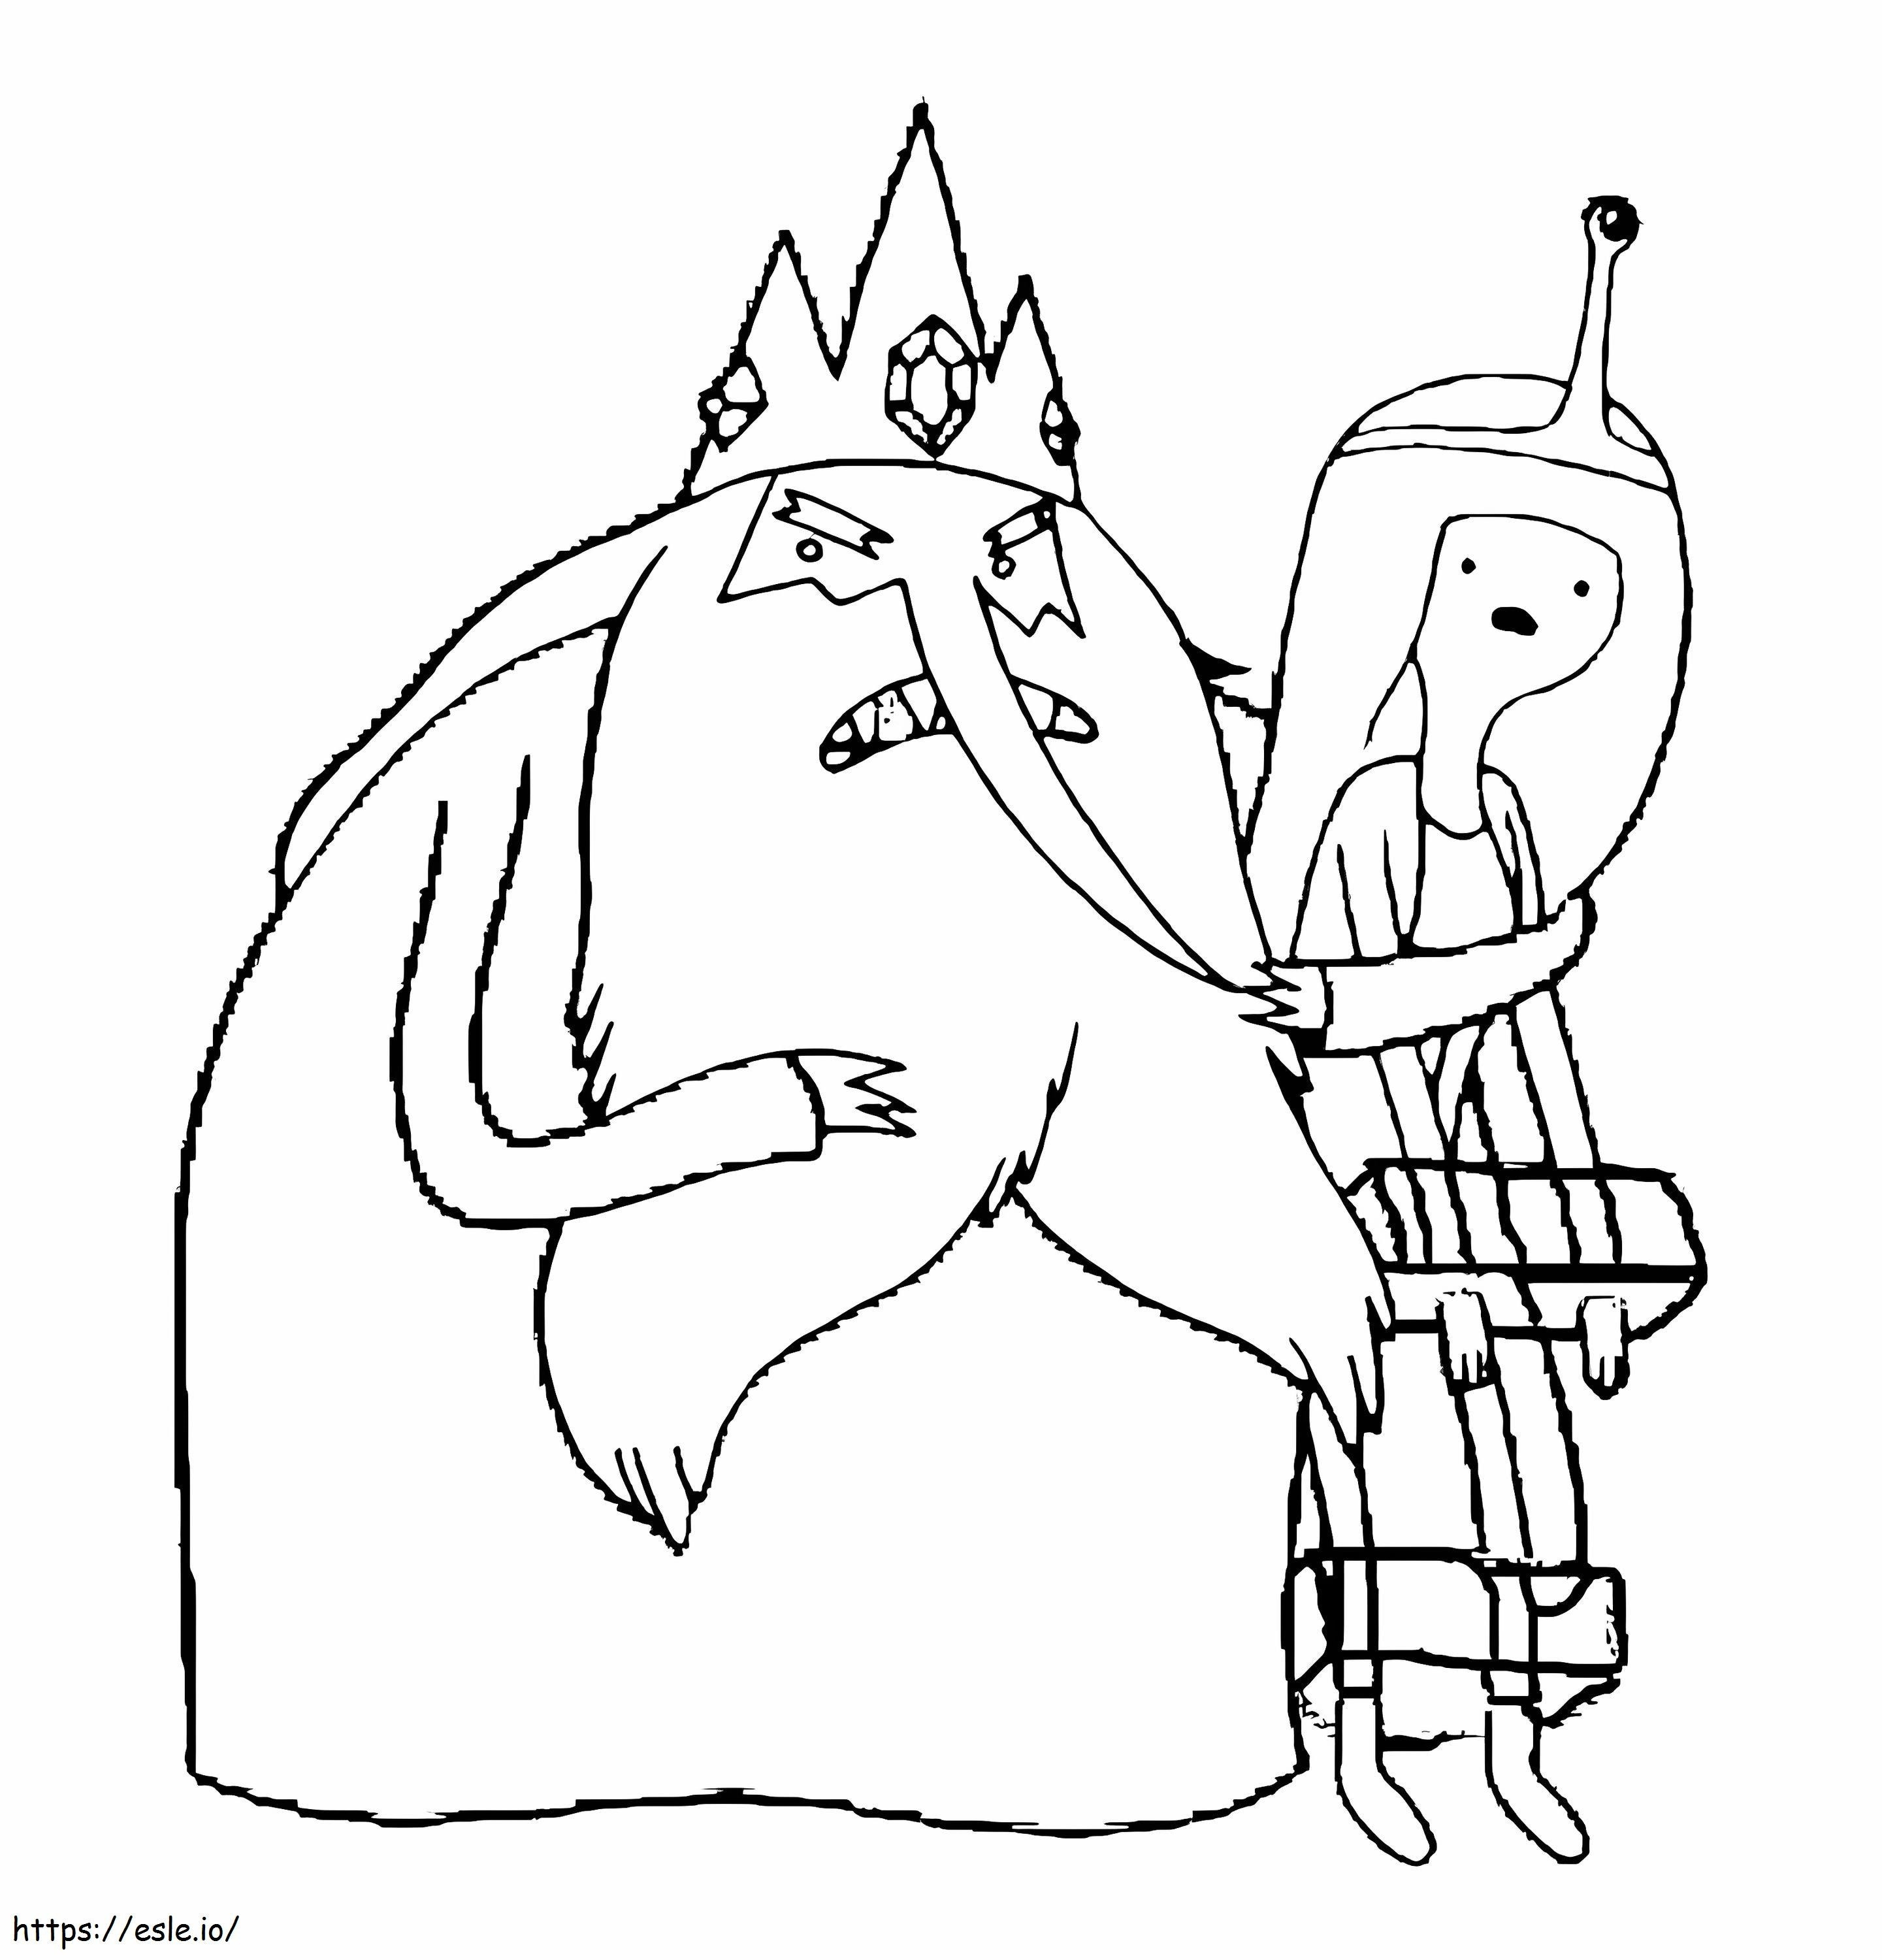 Ice King Caught Princess Bubblegum coloring page